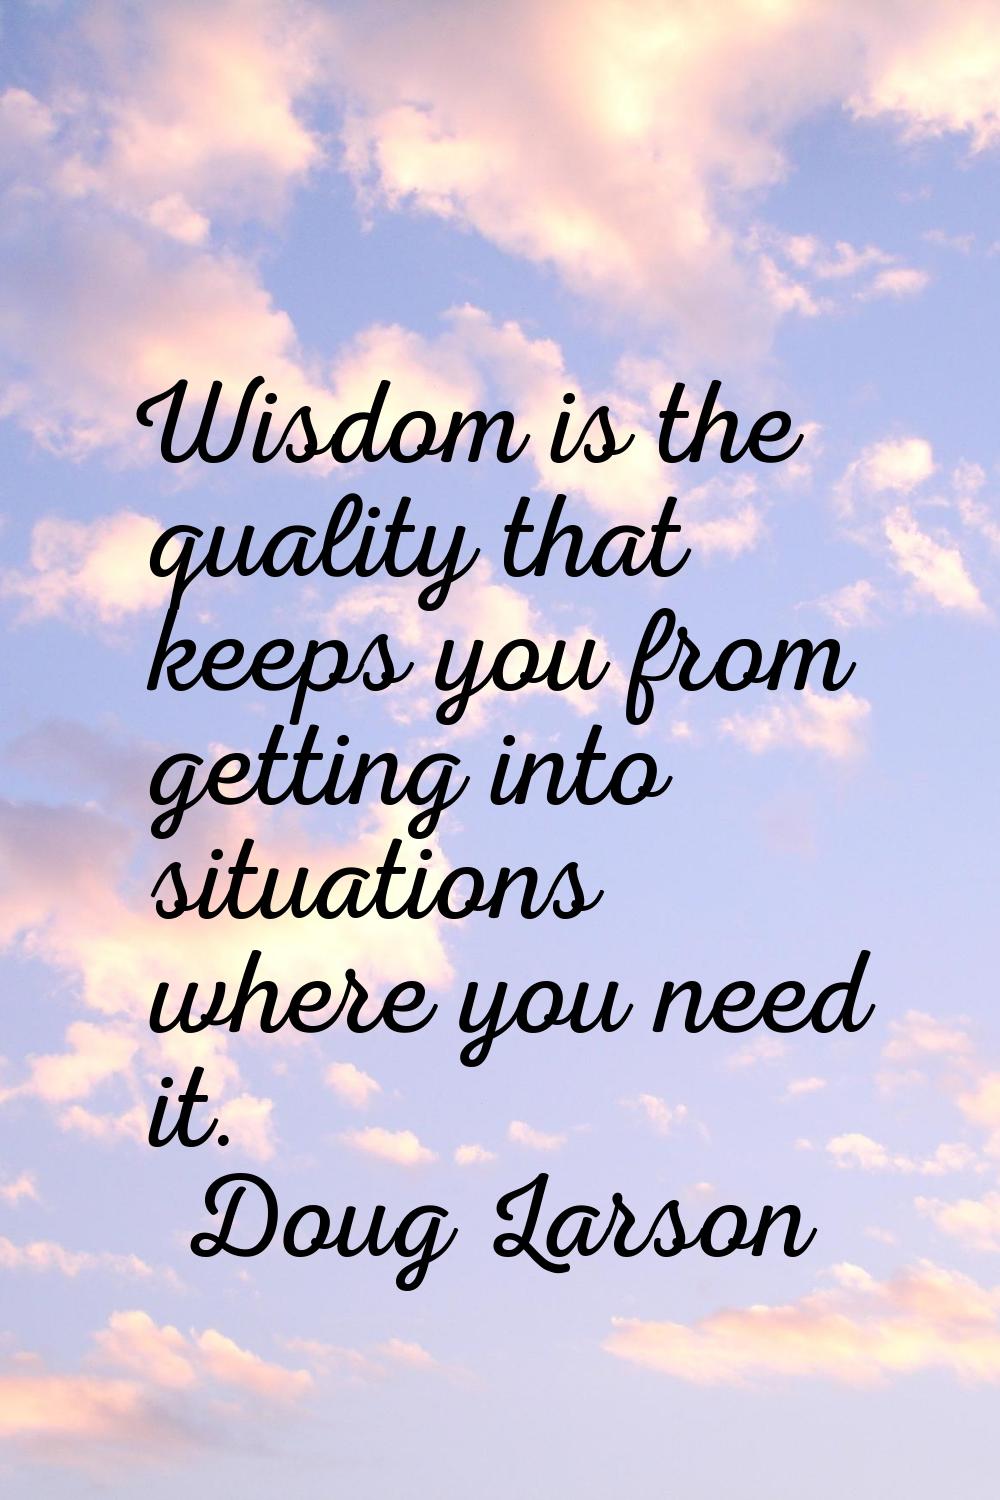 Wisdom is the quality that keeps you from getting into situations where you need it.